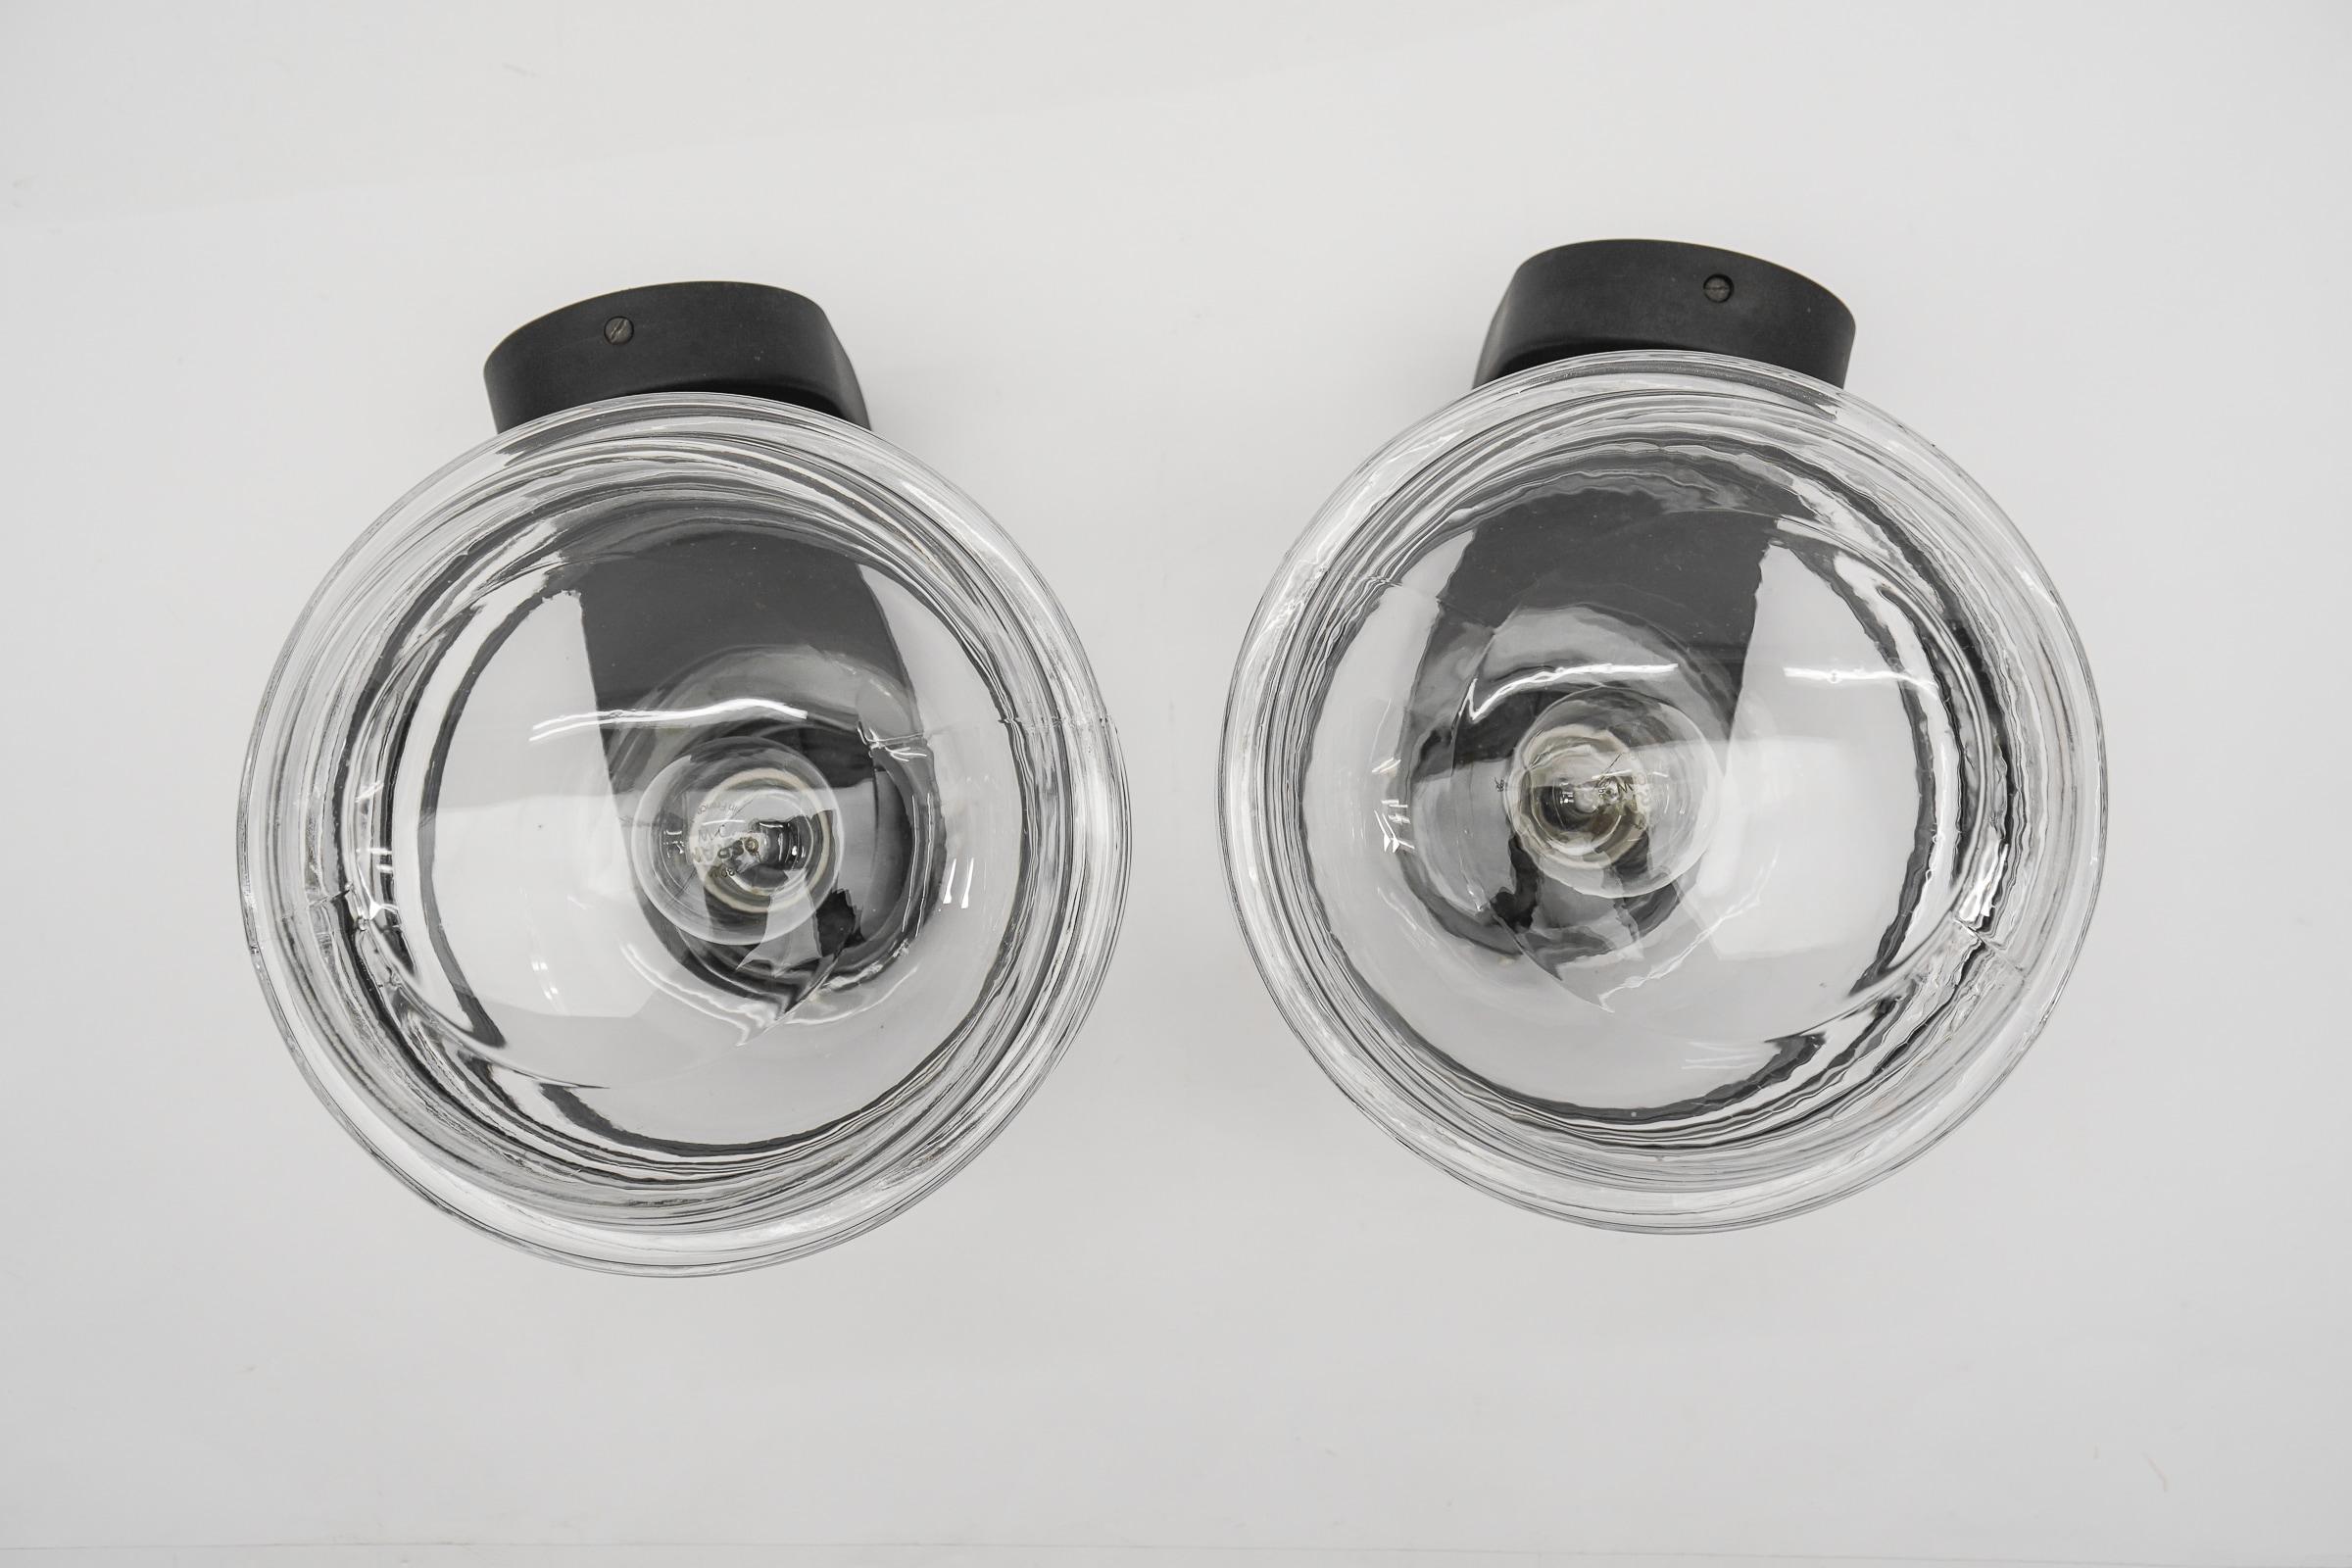 Pair of Space Age Outdoor Wall Lamps in Black and Clear Glass, 1970s For Sale 5